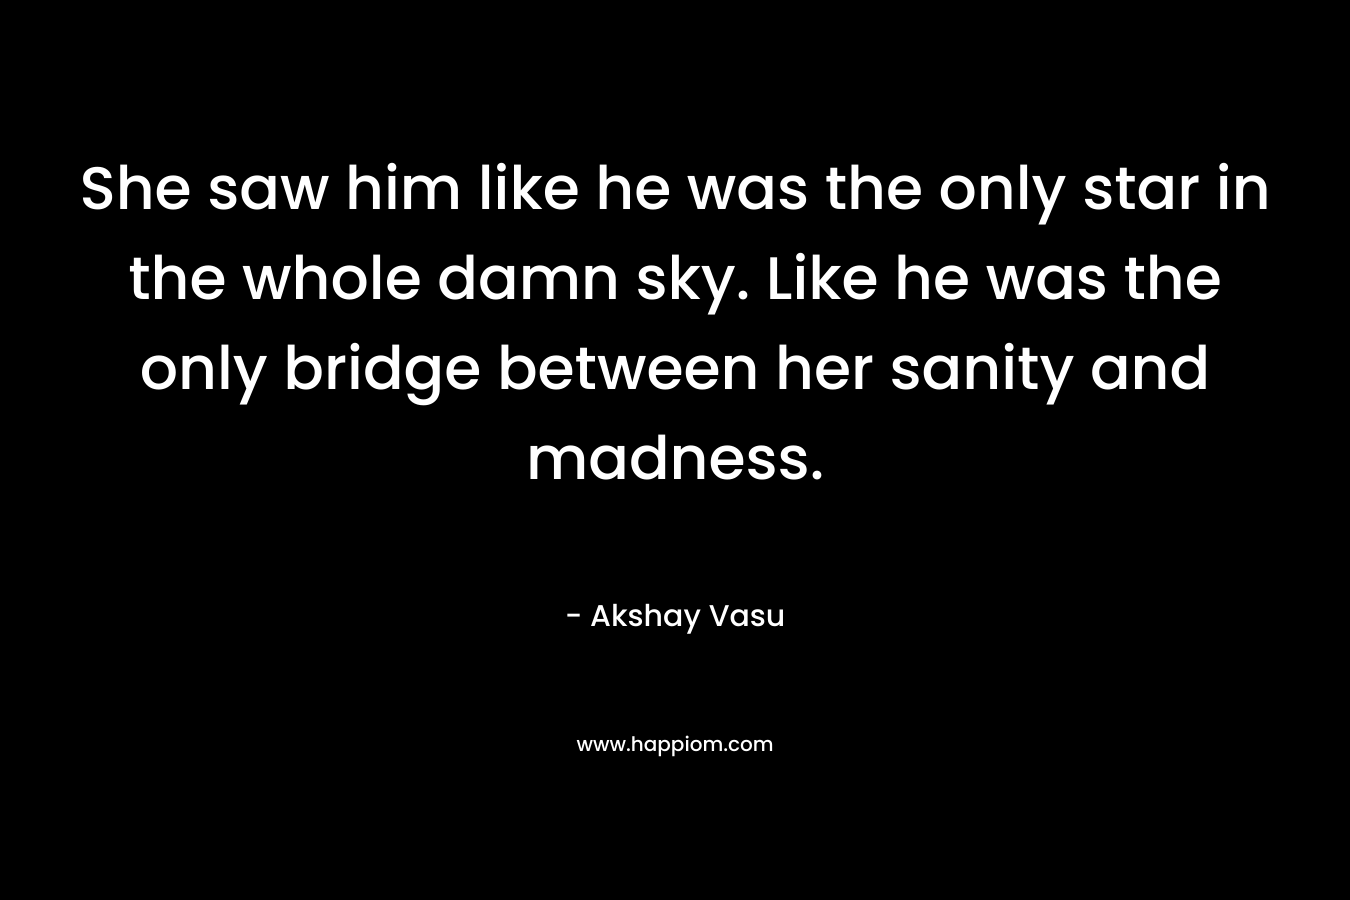 She saw him like he was the only star in the whole damn sky. Like he was the only bridge between her sanity and madness. – Akshay Vasu